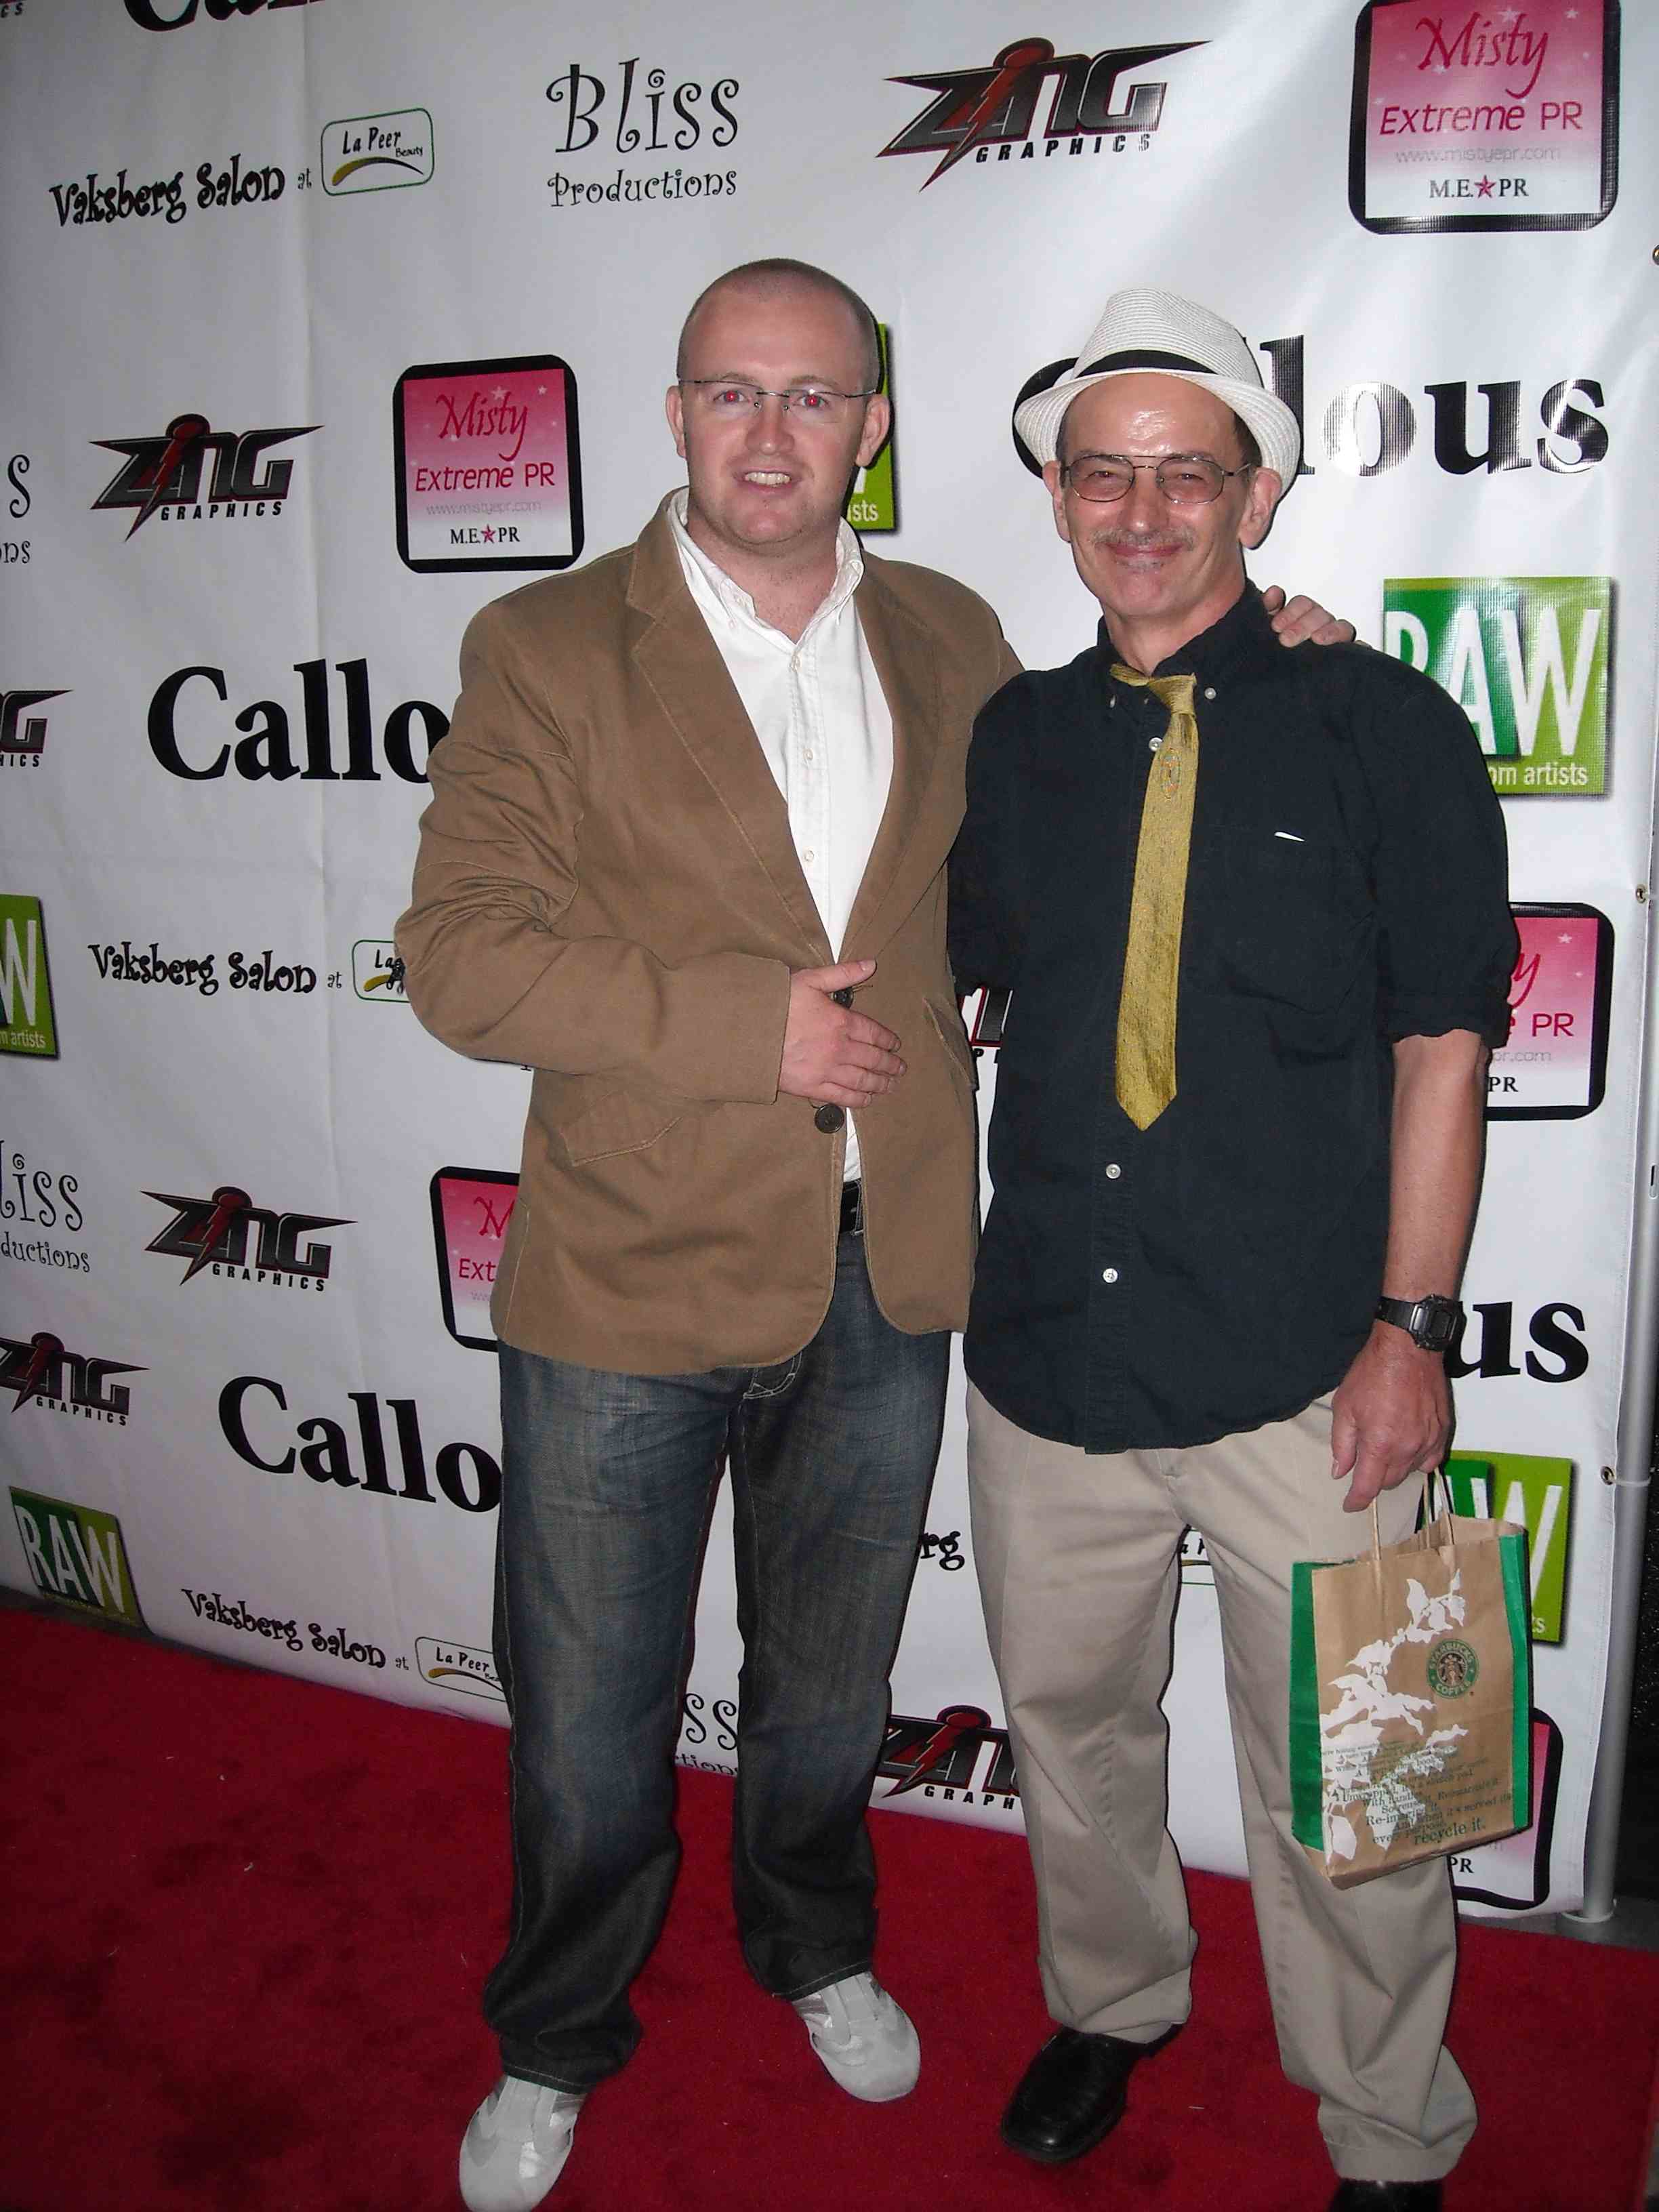 Hank Grover (R) and John Duncan (L) on the Red Carpet